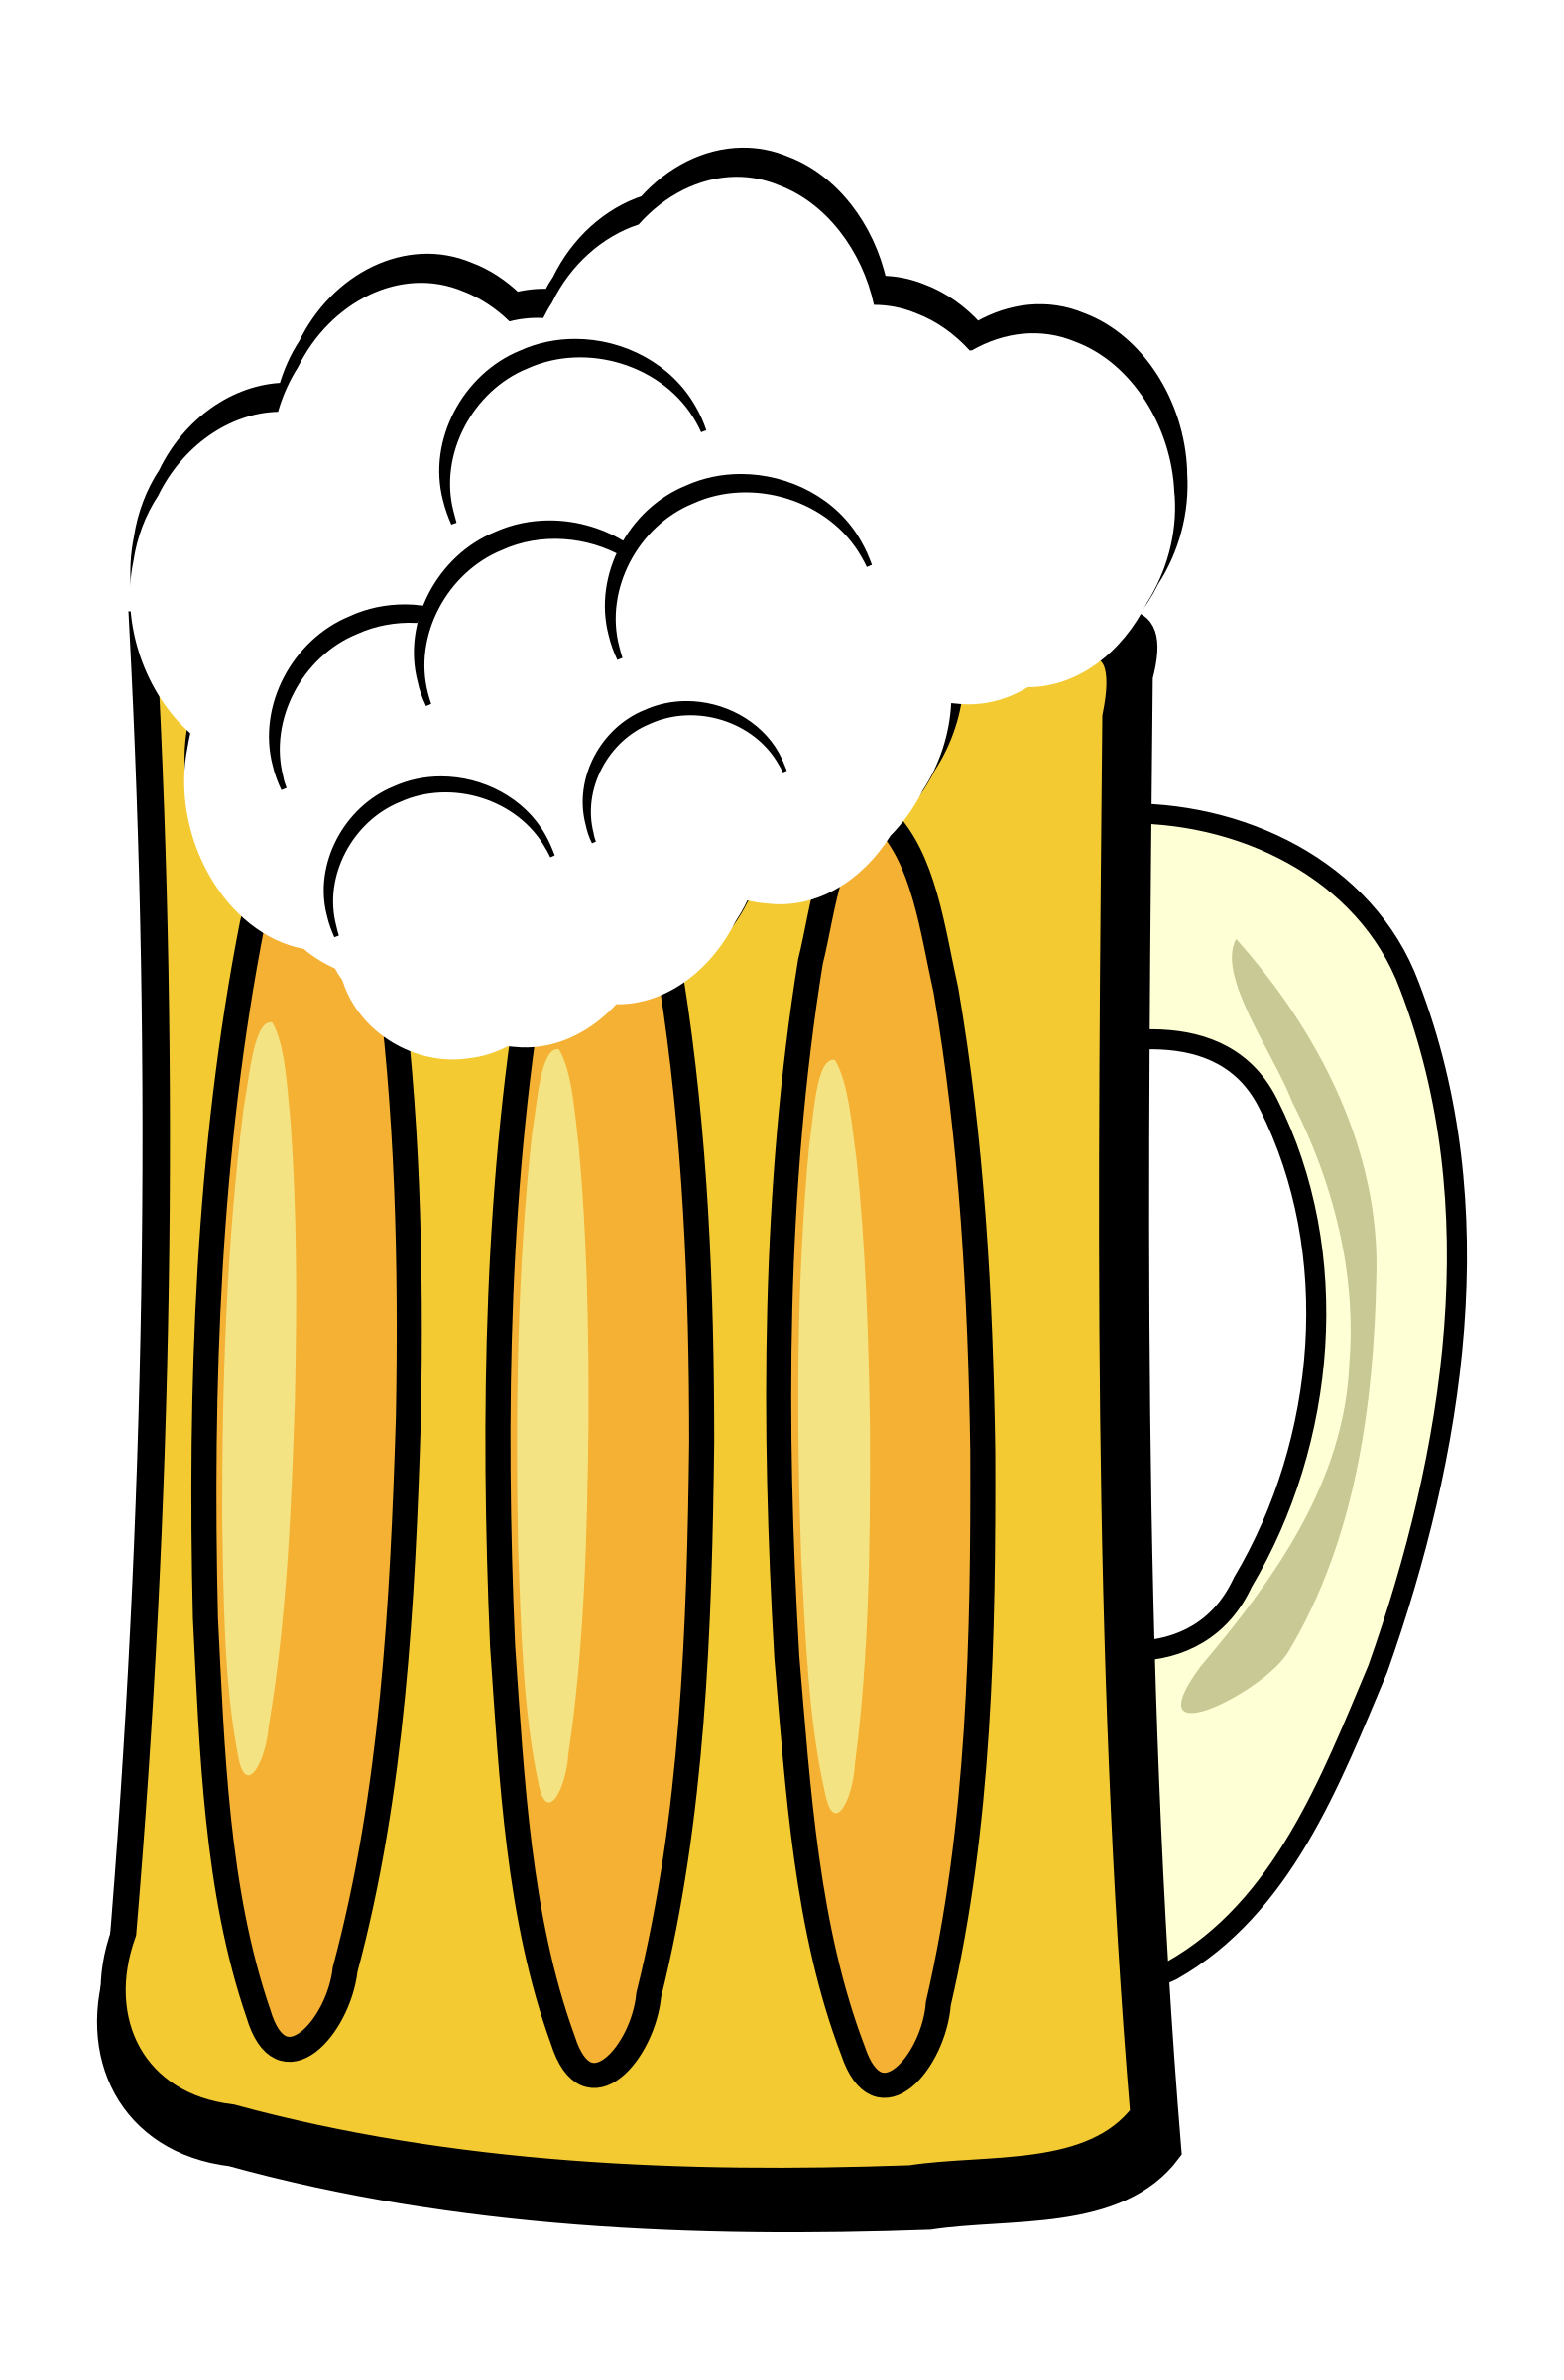 Drinking clipart beerclip. Beer big image png